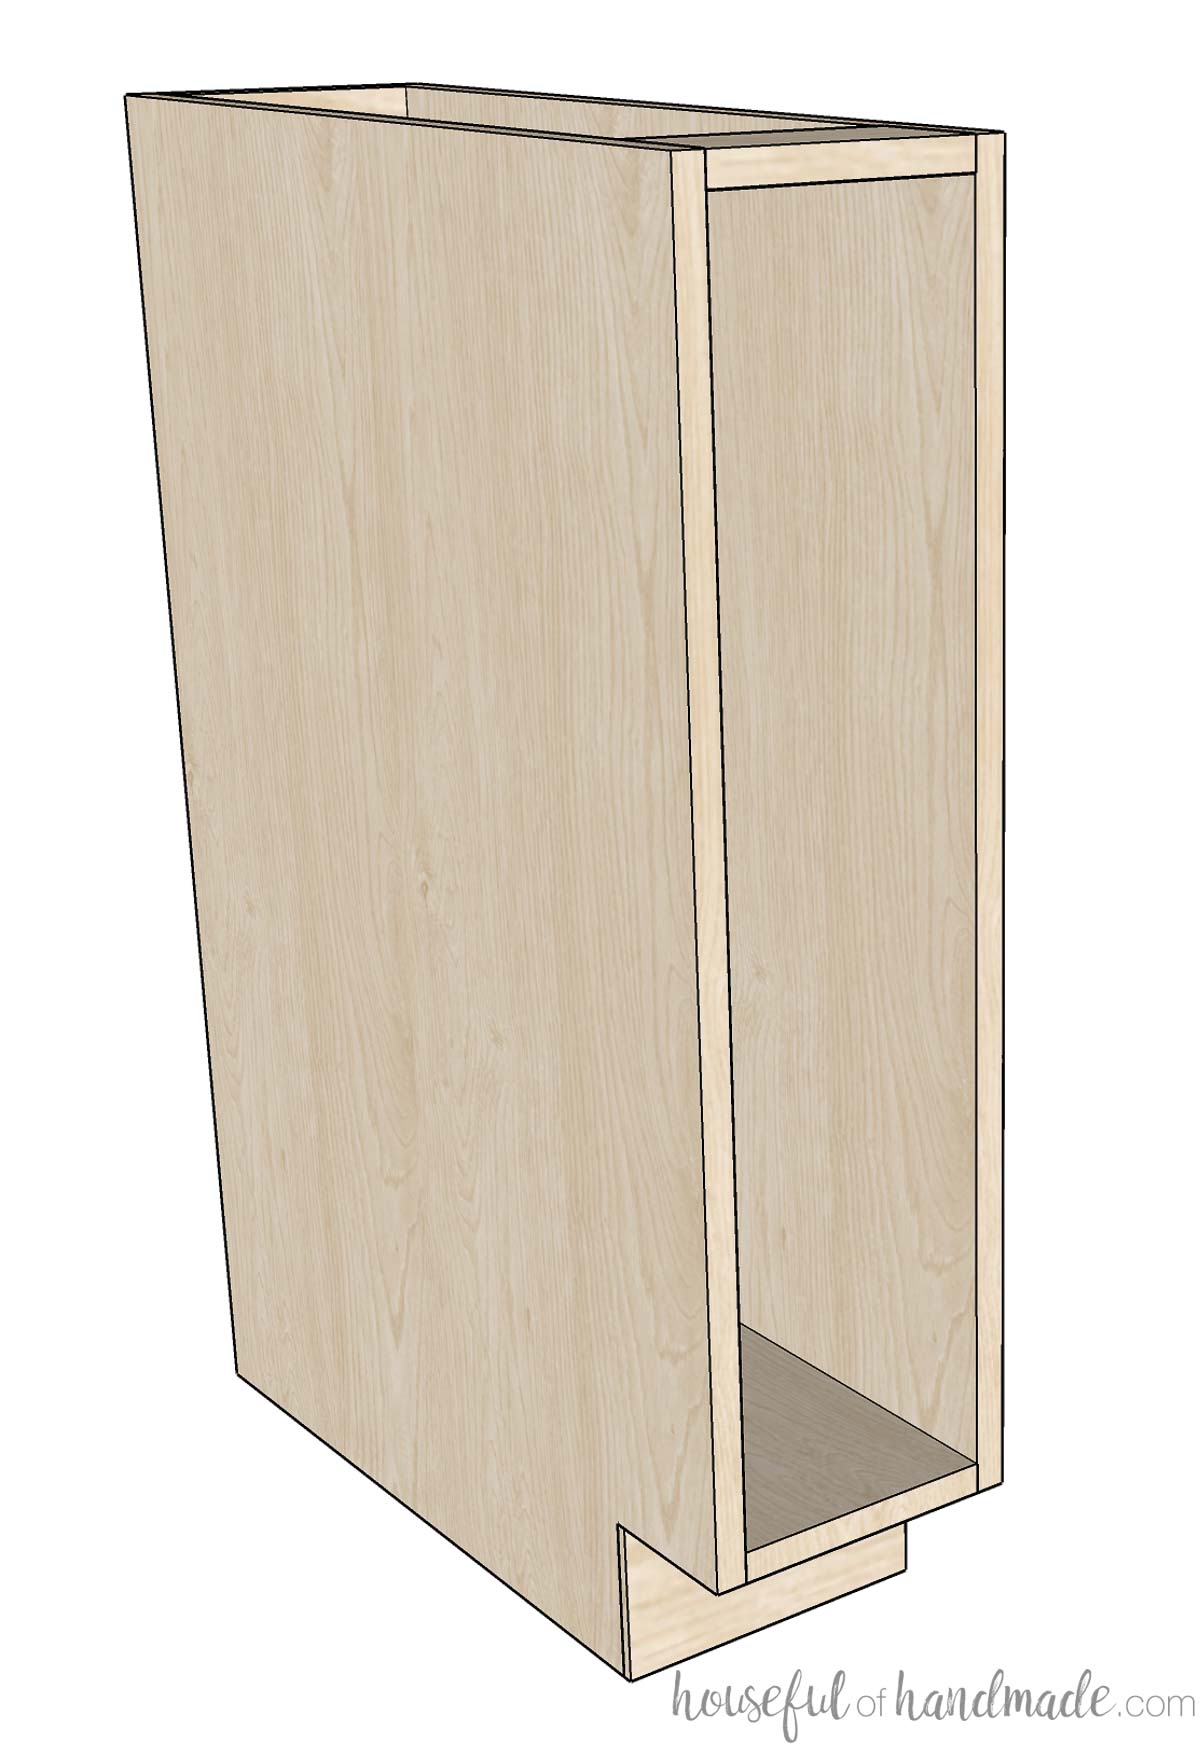 3D drawing of a skinny frameless base cabinet made for a spice rack insert. 